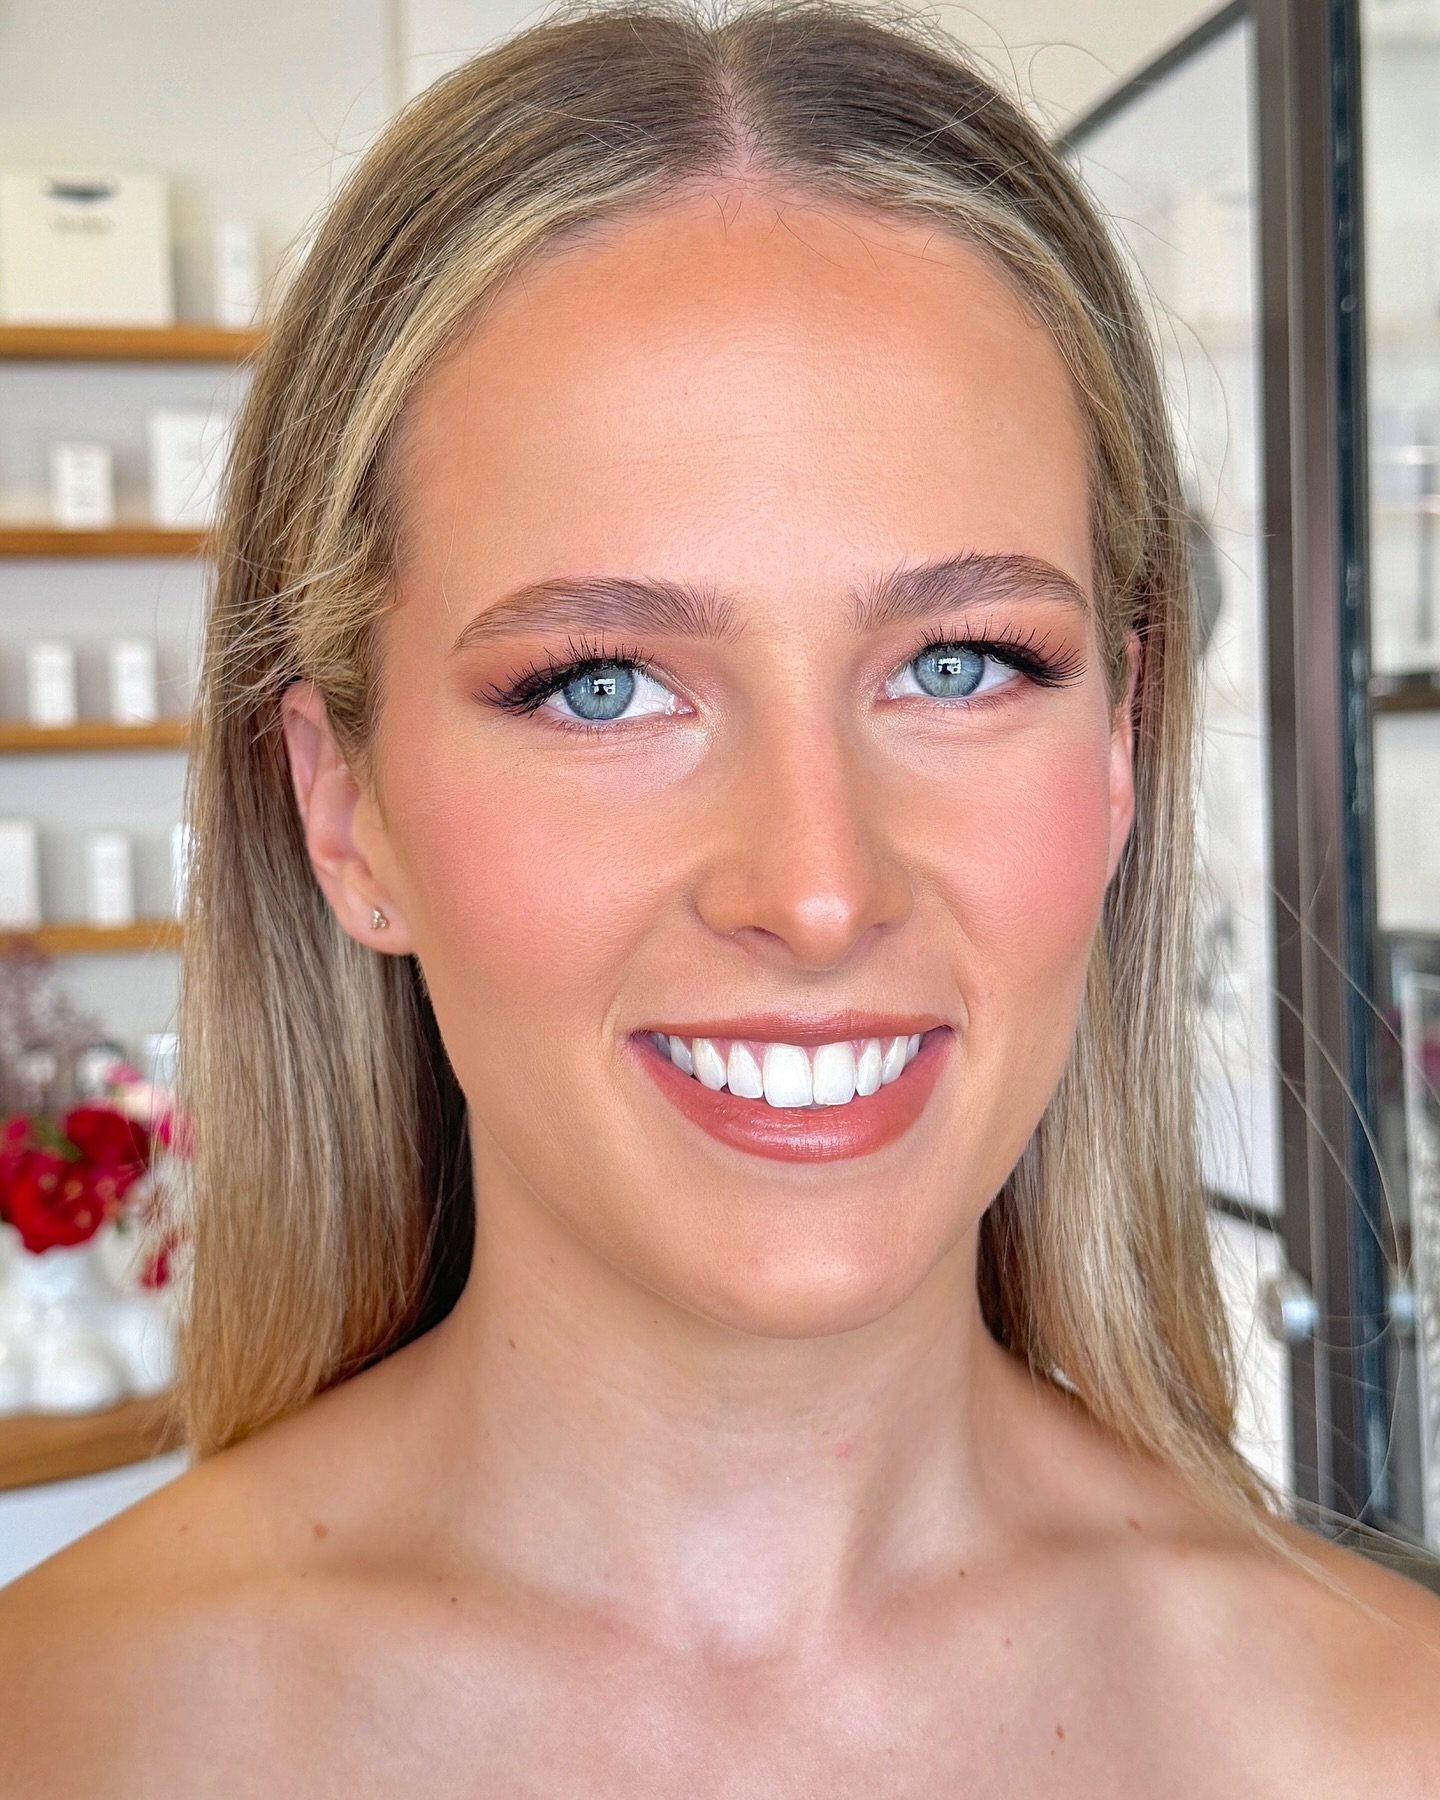 🤎Skin and makeup by Kirra🤎

We used the Suzy lipstick in Miss Tanielle.
Laura also uses iS Clinical Reparative Moisturiser and Hydra Cool Serum in her skin care routine. 

.
.
.

#by_kirra #waggamakeupartist
#waggaweddings #makeup
#waggamakeup 
#wa